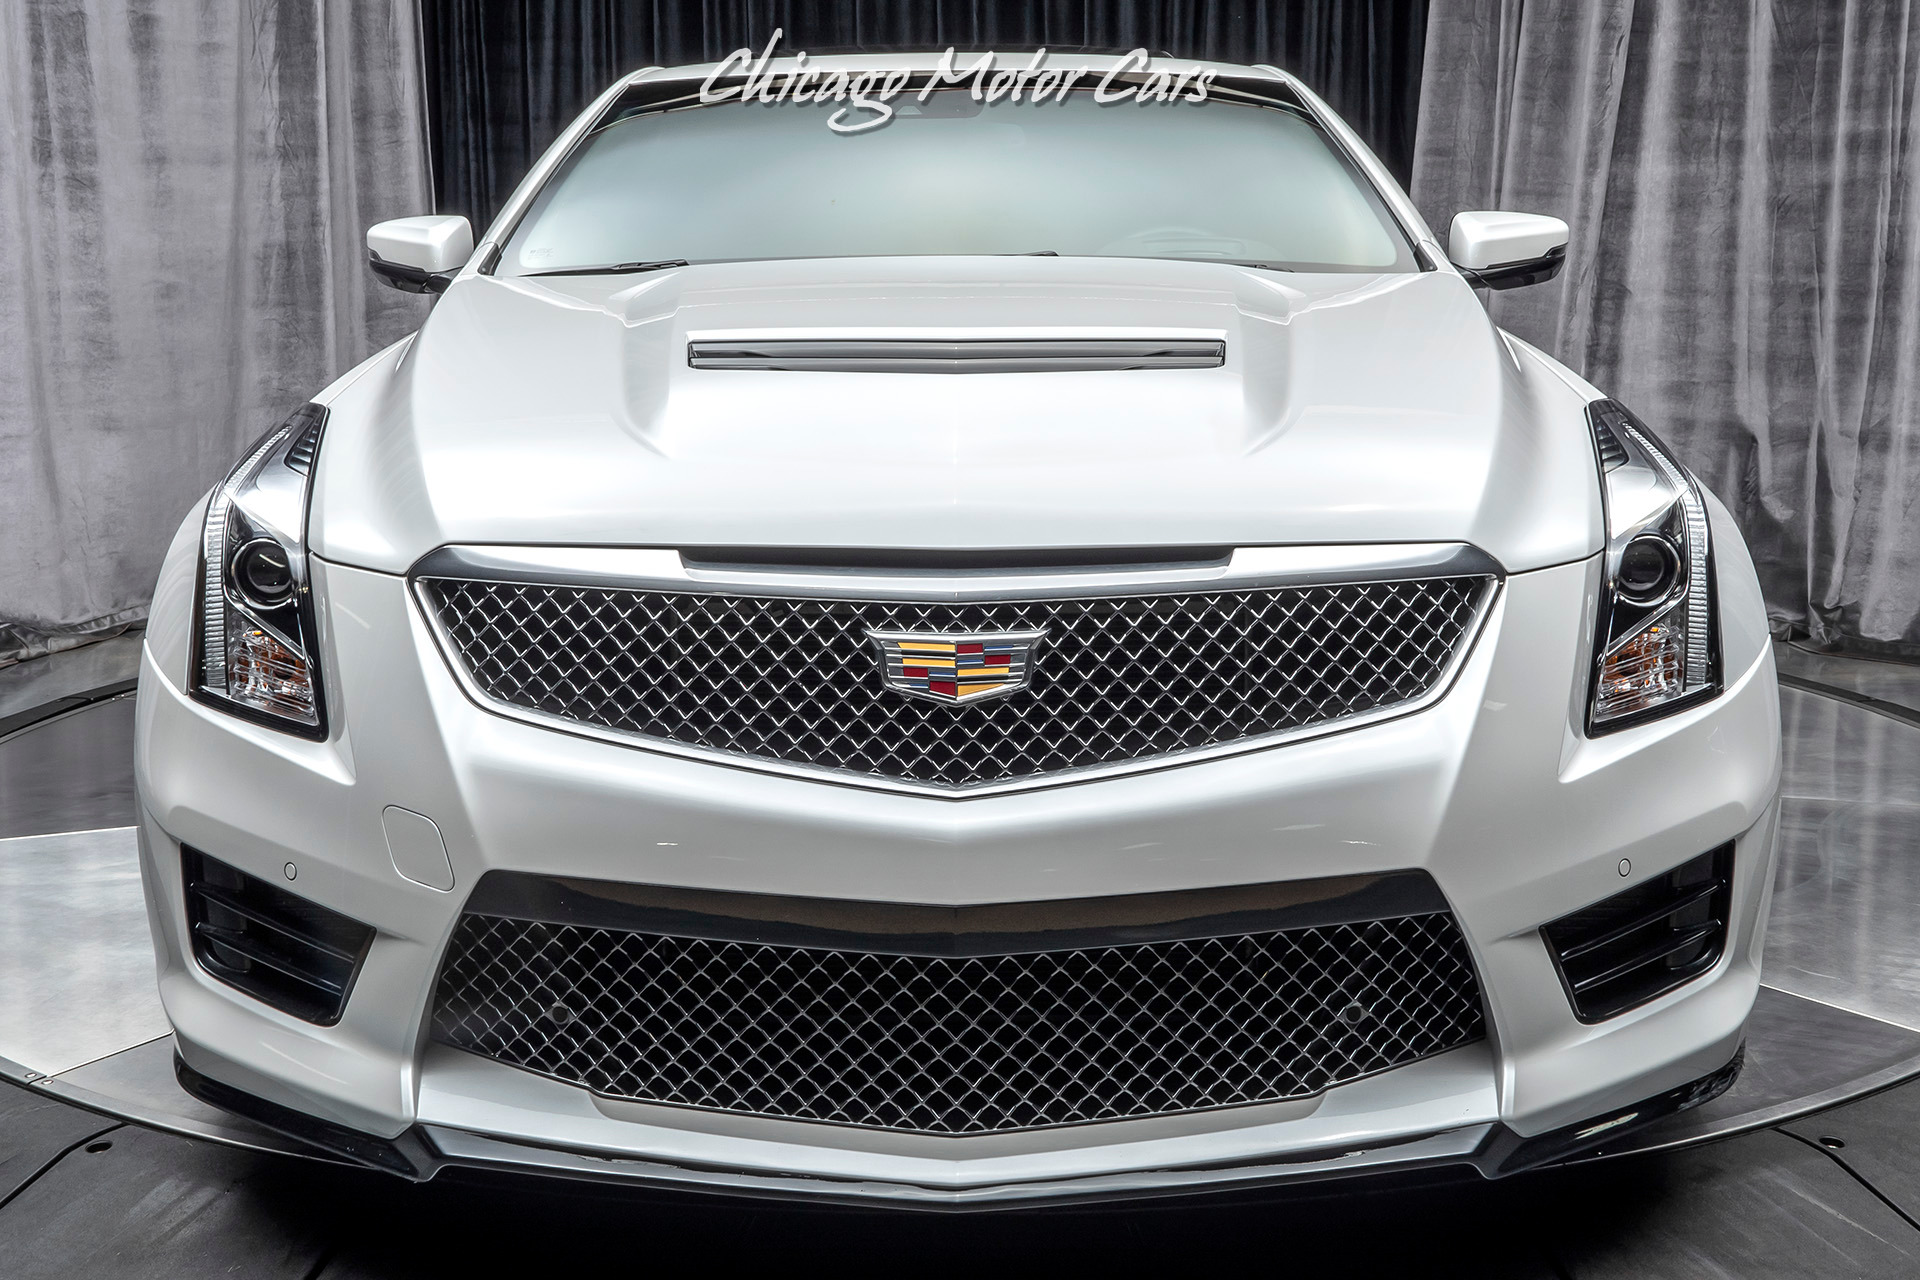 Used-2016-Cadillac-ATS-V-Coupe-600-HORSEPOWER-6-Speed-Manual-ONE-OWNER